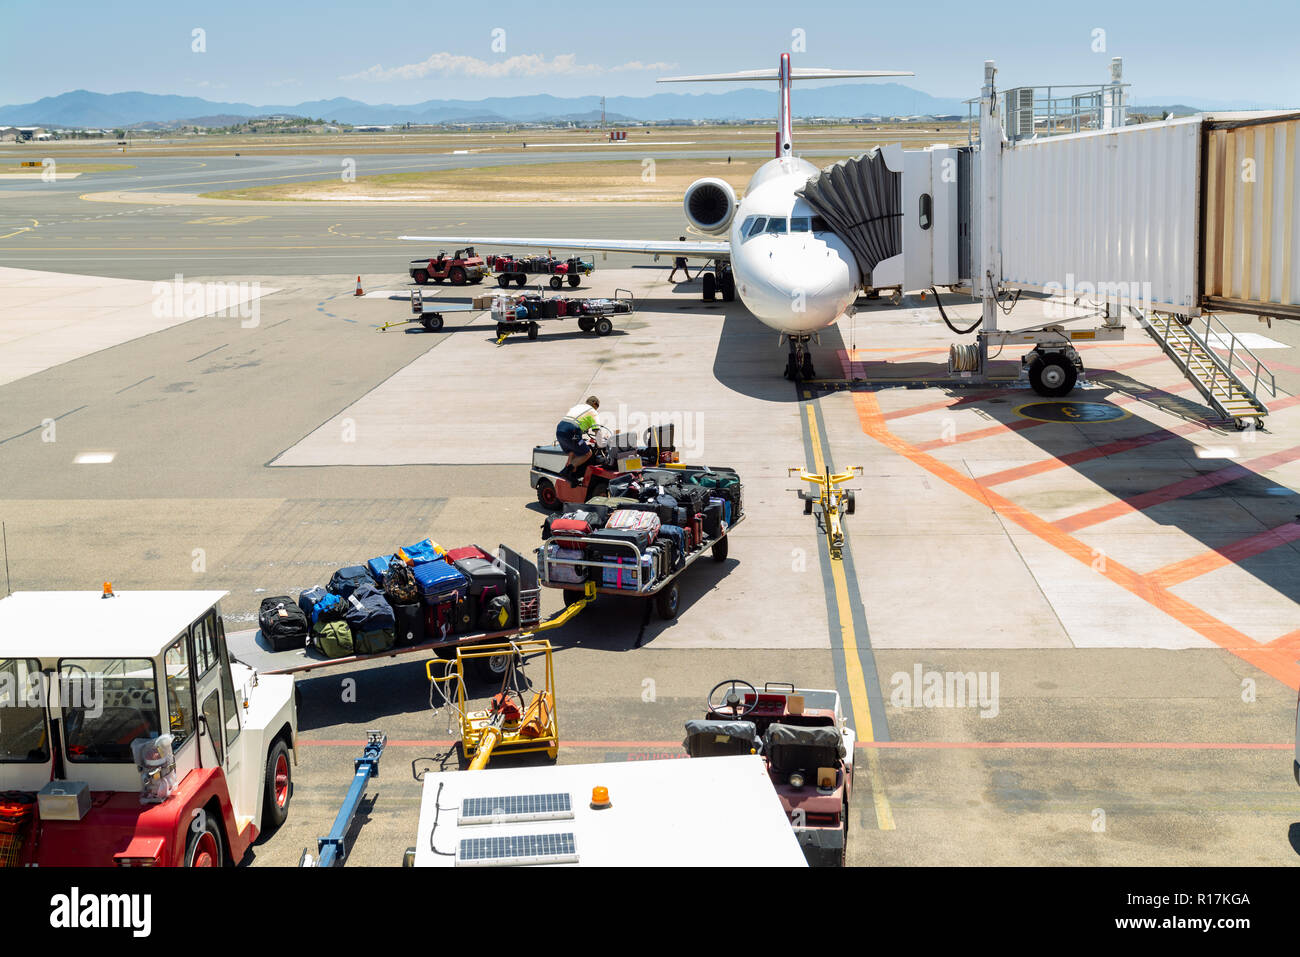 Crew preparing to load luggage onto plane in preparation for takeoff at Townsville airport, North Queensland, Australia Stock Photo